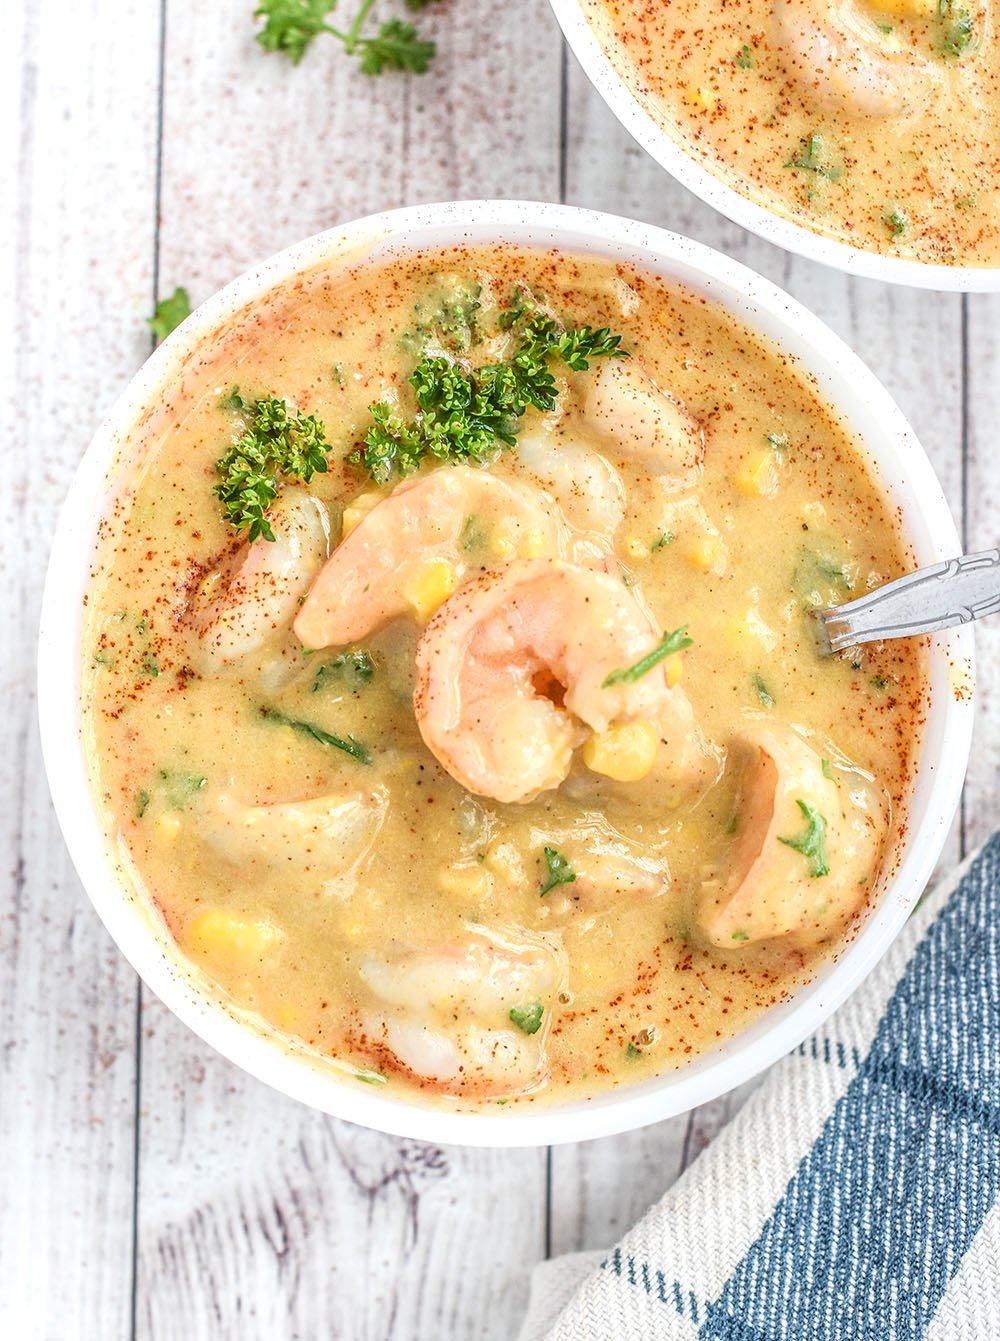 Corn and shrimp chowder in a bowl